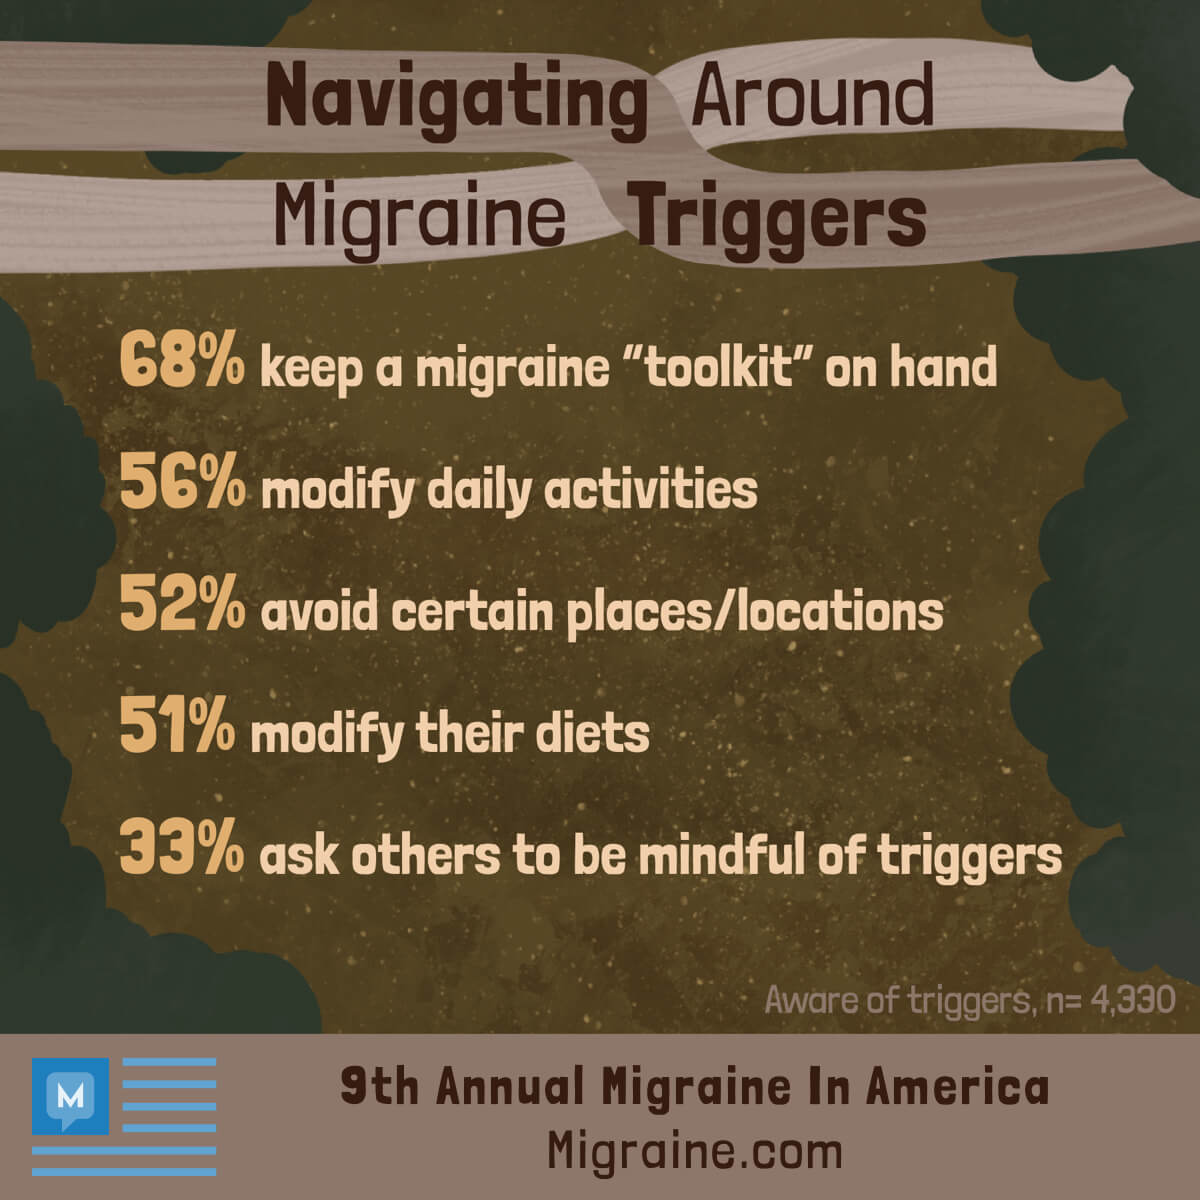 Respondents navigate around their migraine triggers by keeping a “toolkit” (68%), modifying their activities (56%), avoiding certain places (52%), and more.